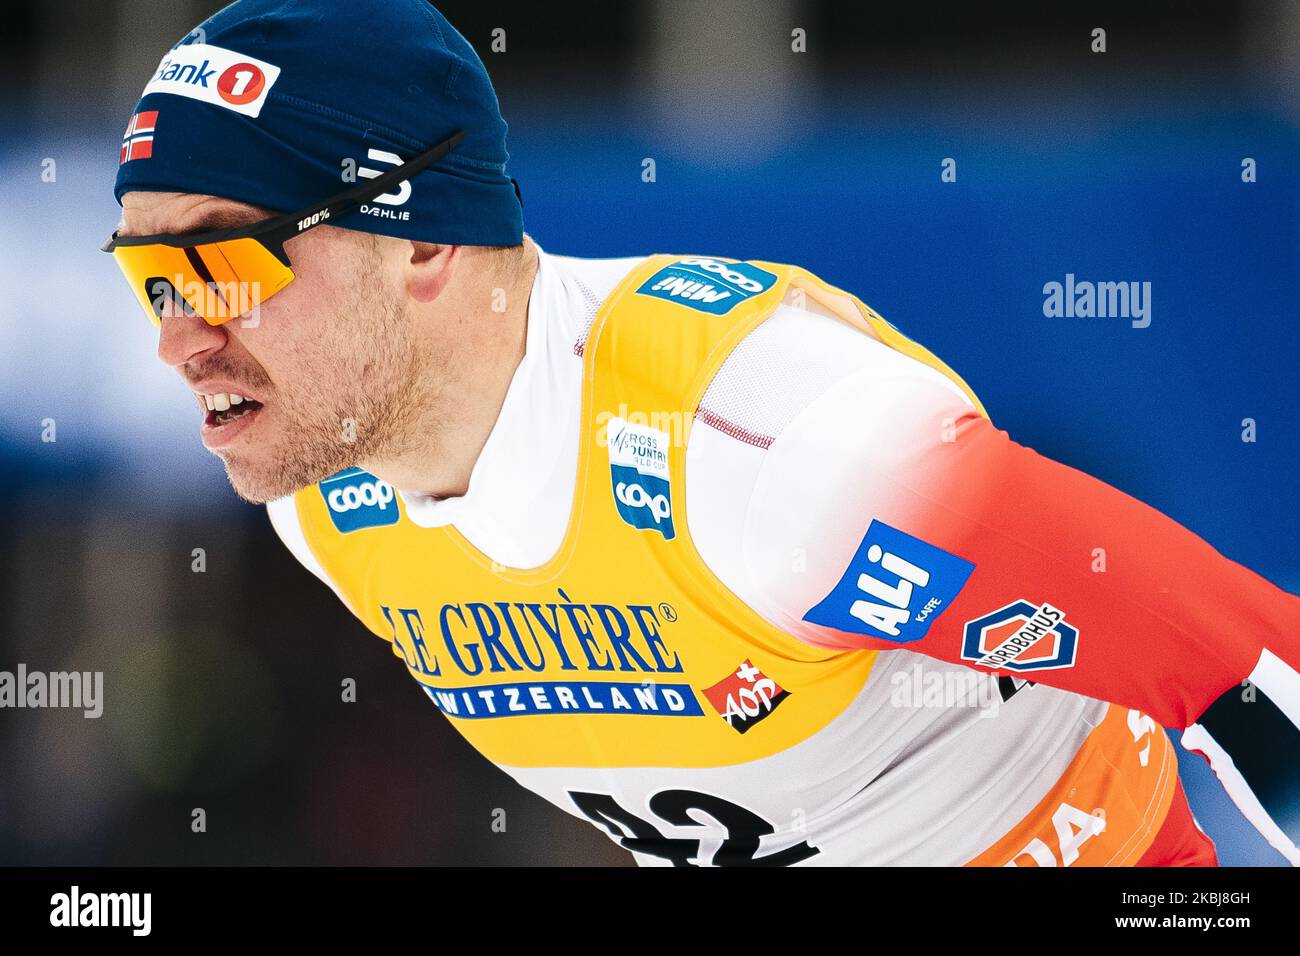 Paal Golberg during the men’s 15.0 km cross-country interval of the FIS Nordic Ski World Championships in Lahti, Finland, on February 29, 2020. (Photo by Antti Yrjonen/NurPhoto) Stock Photo